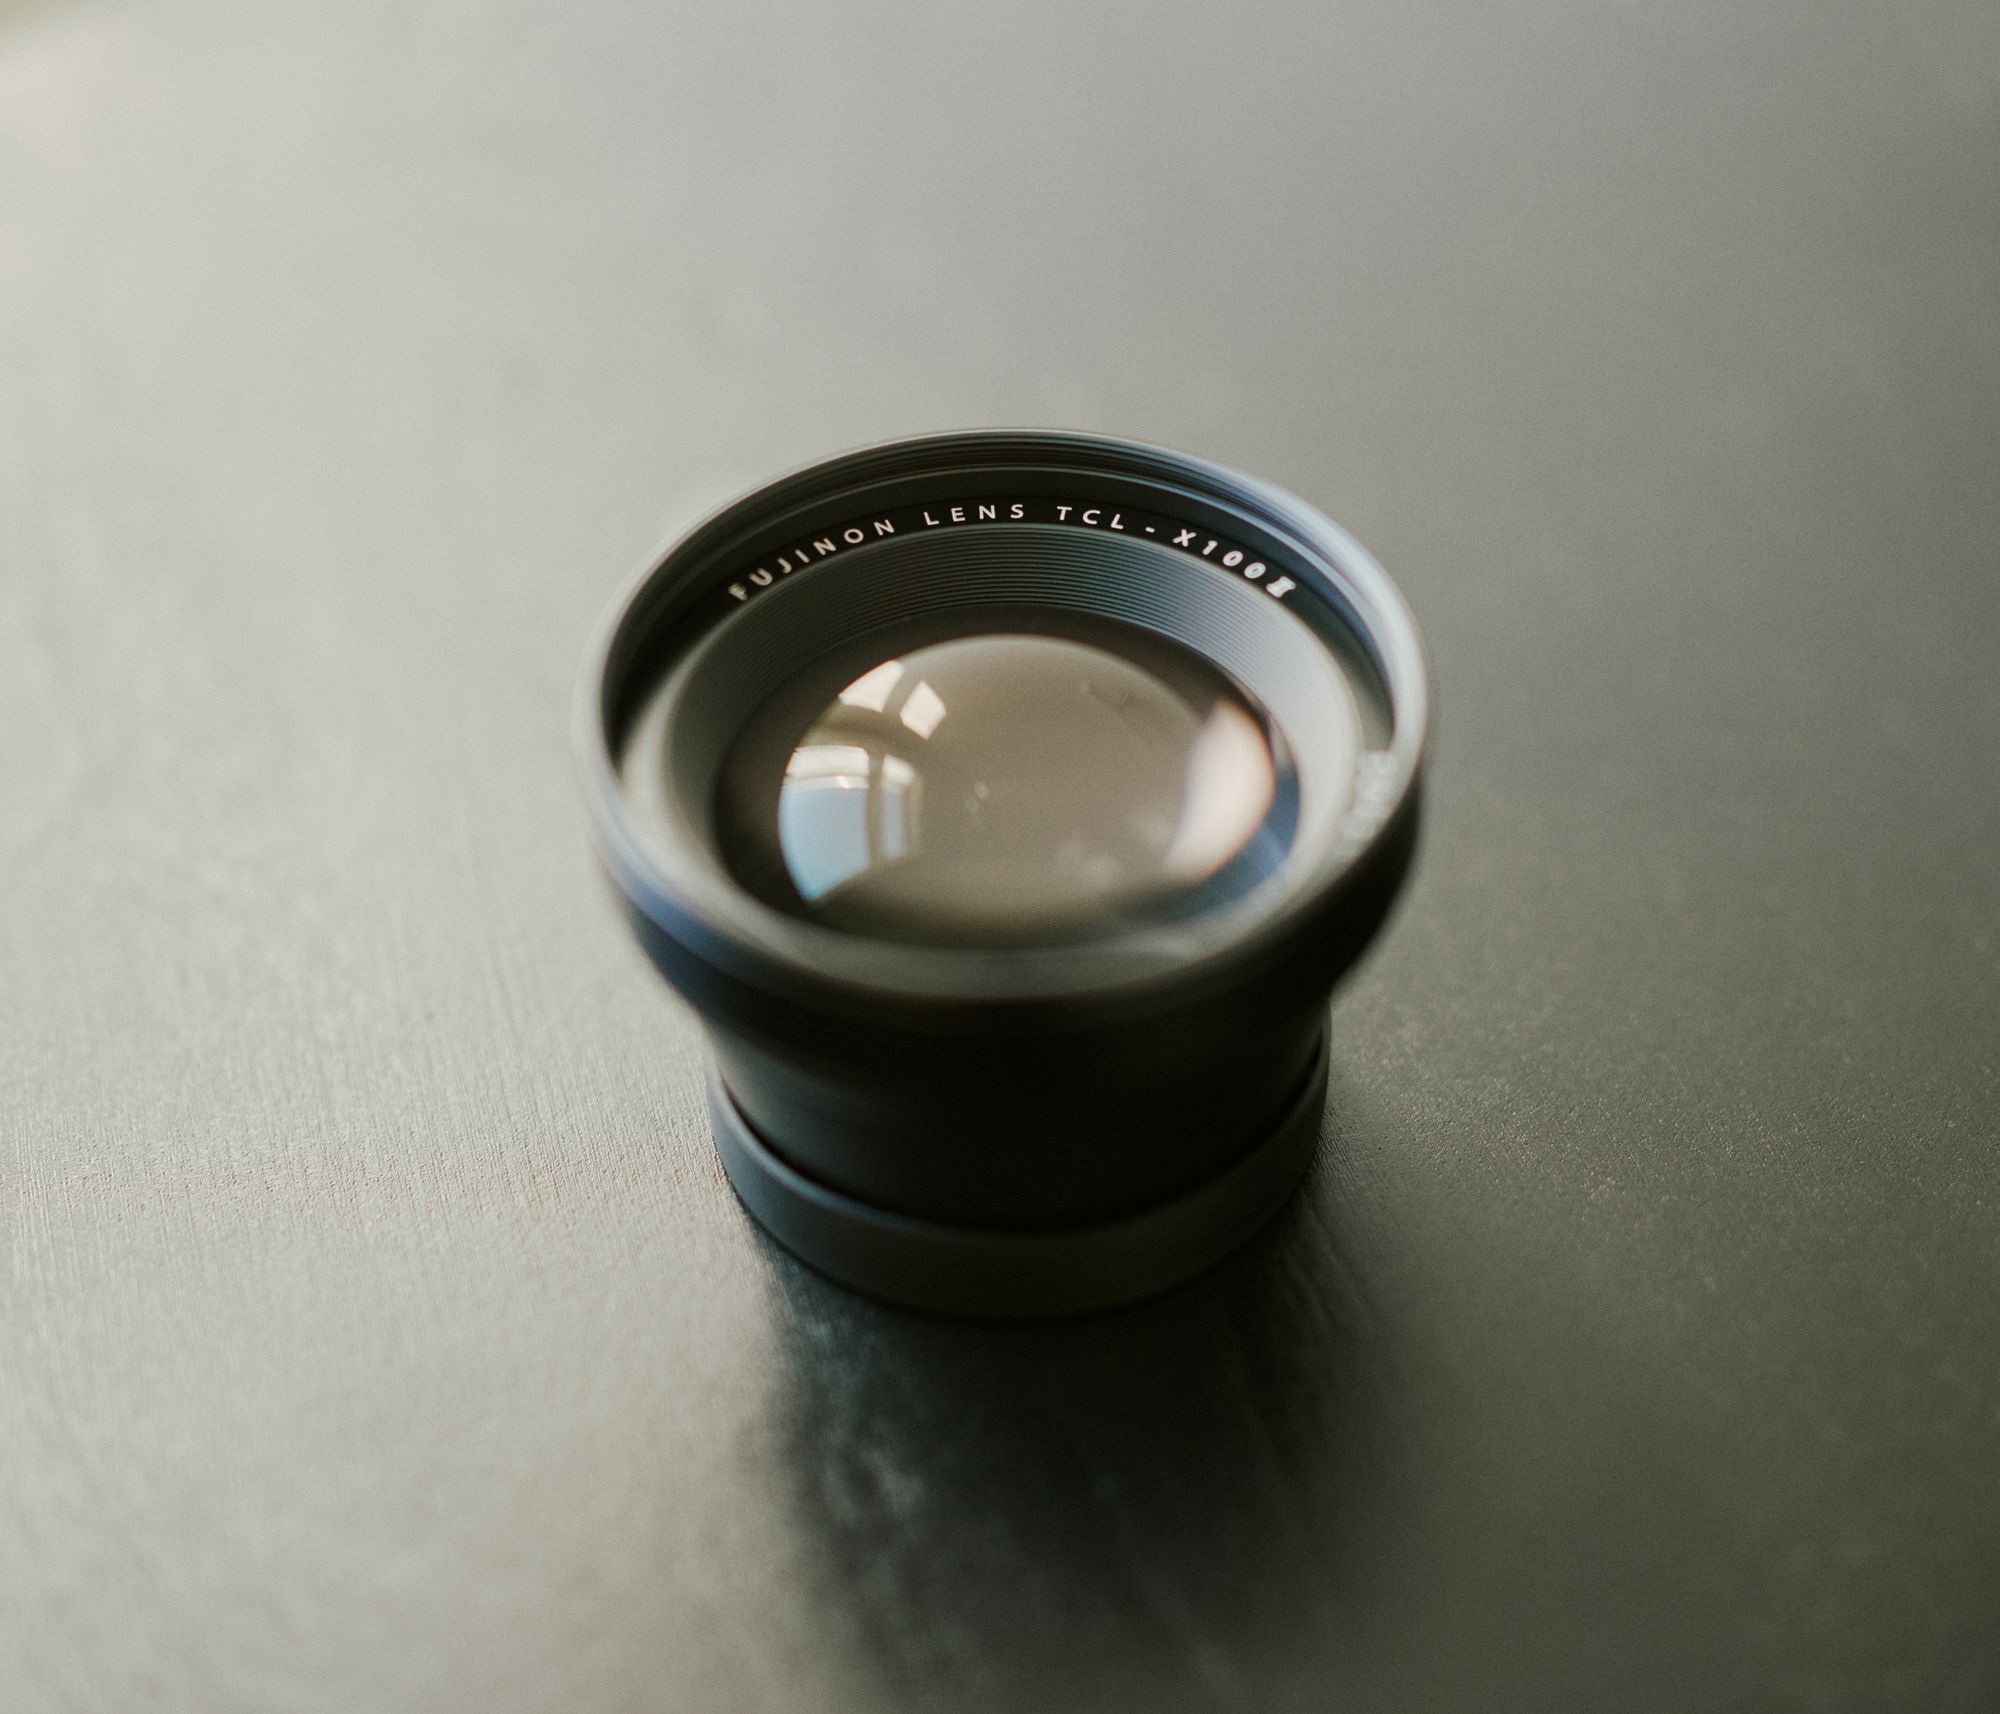 A Review Of The Fujifilm TCL-X100 II Tele Conversion Lens